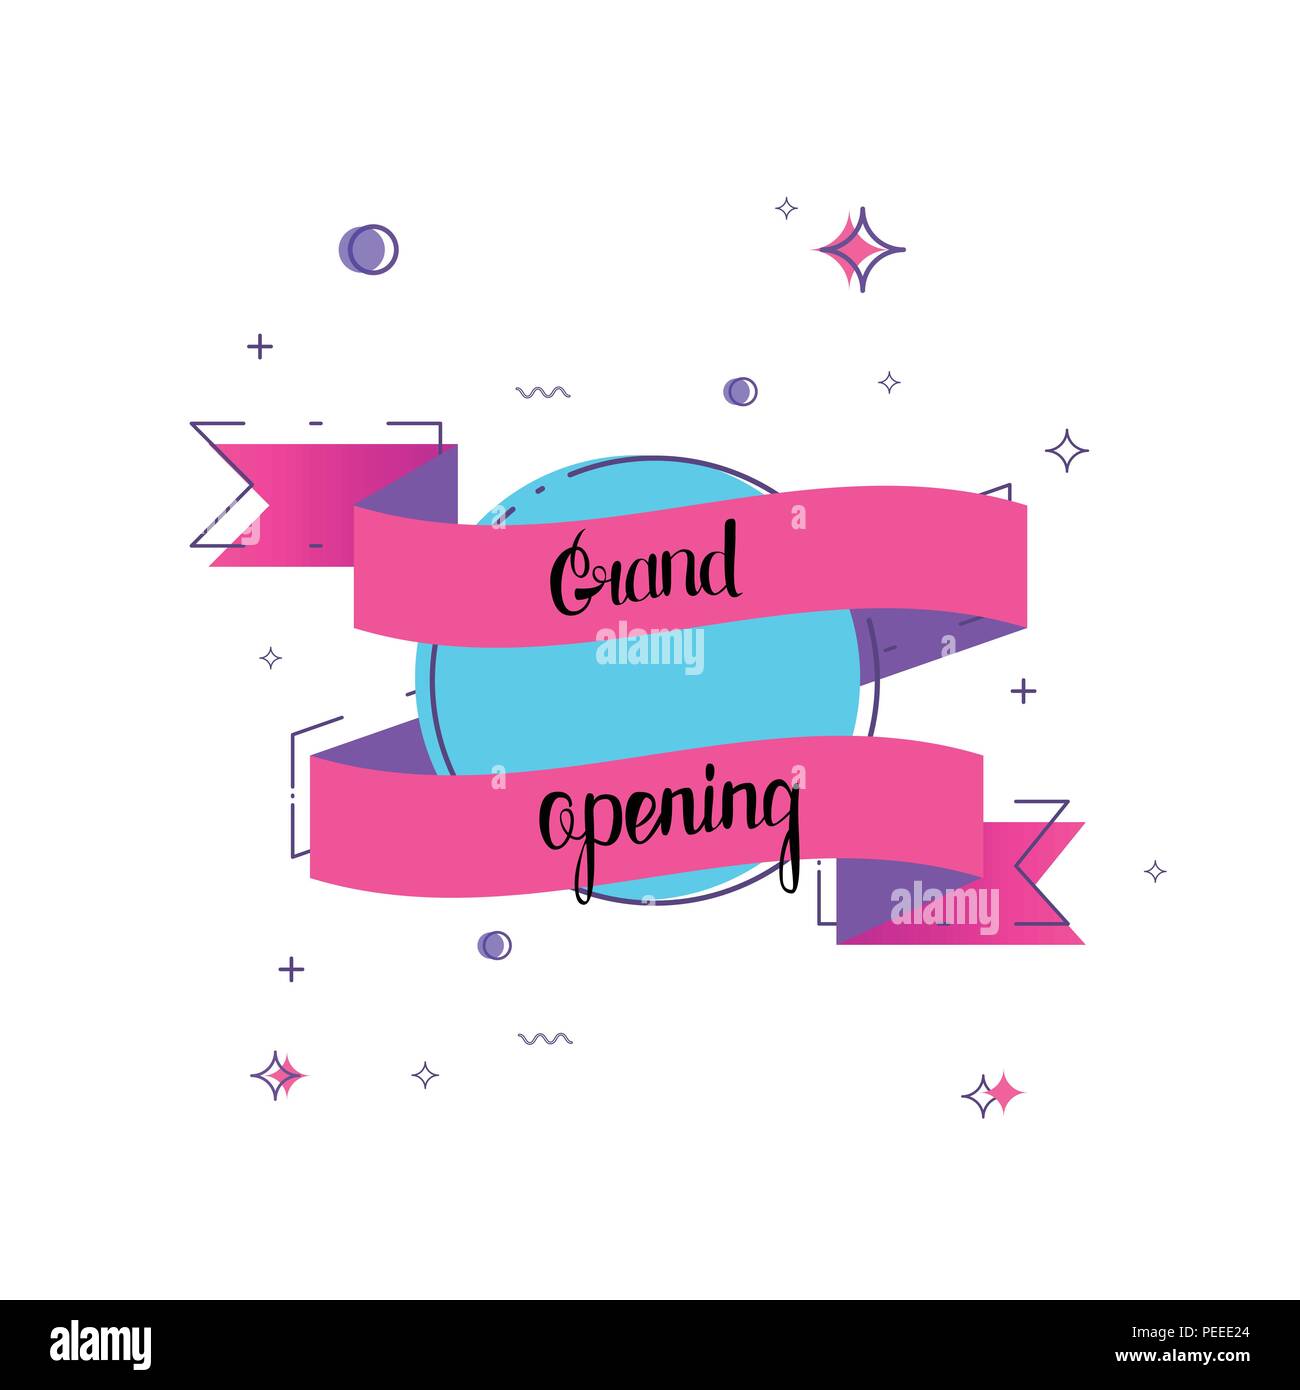 Grand opening banner isolated on white background. Vector illustration. Stock Vector